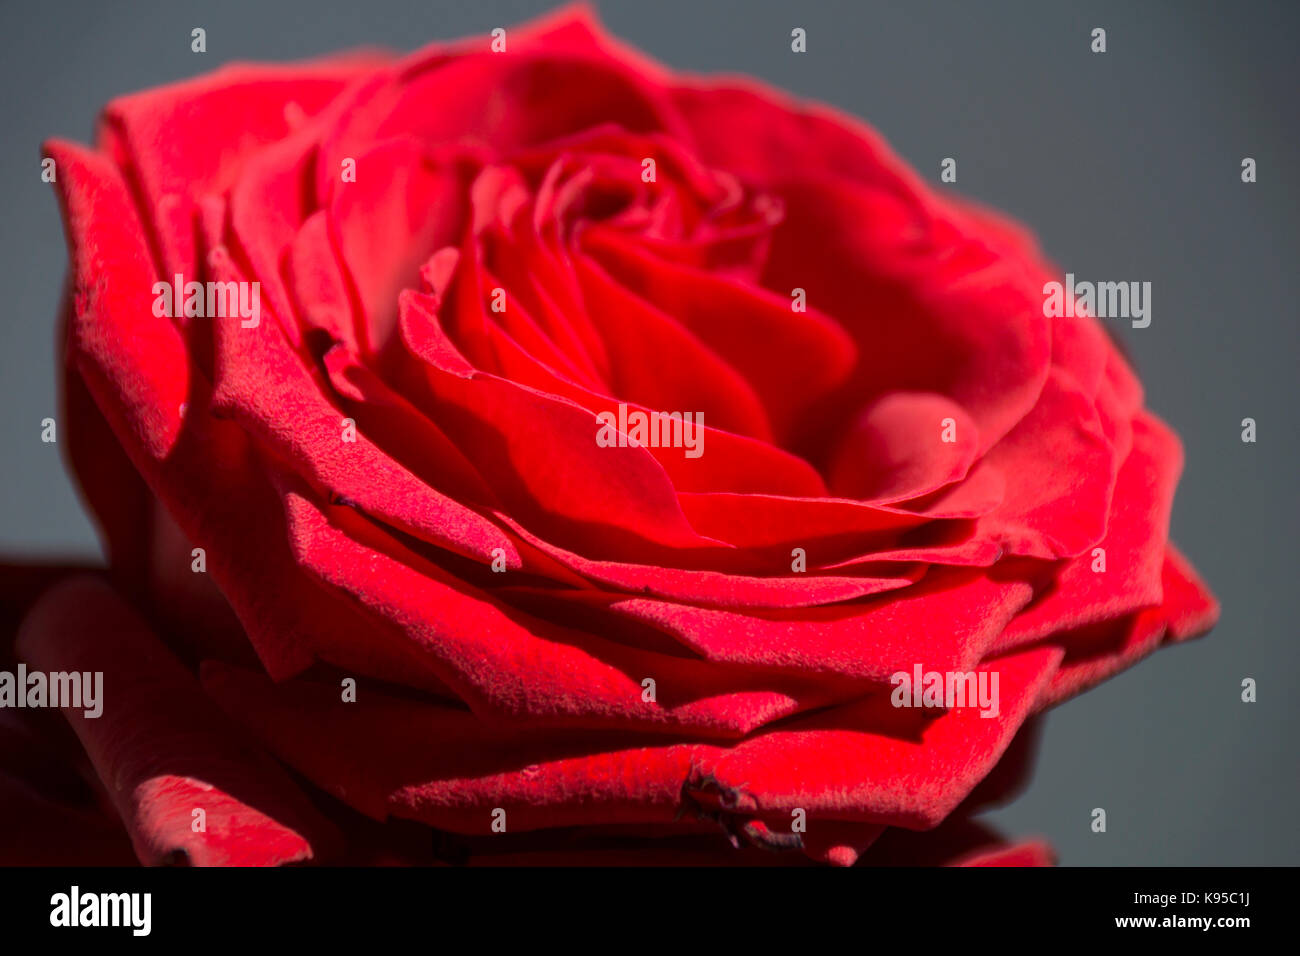 Red rose with a dark background Stock Photo